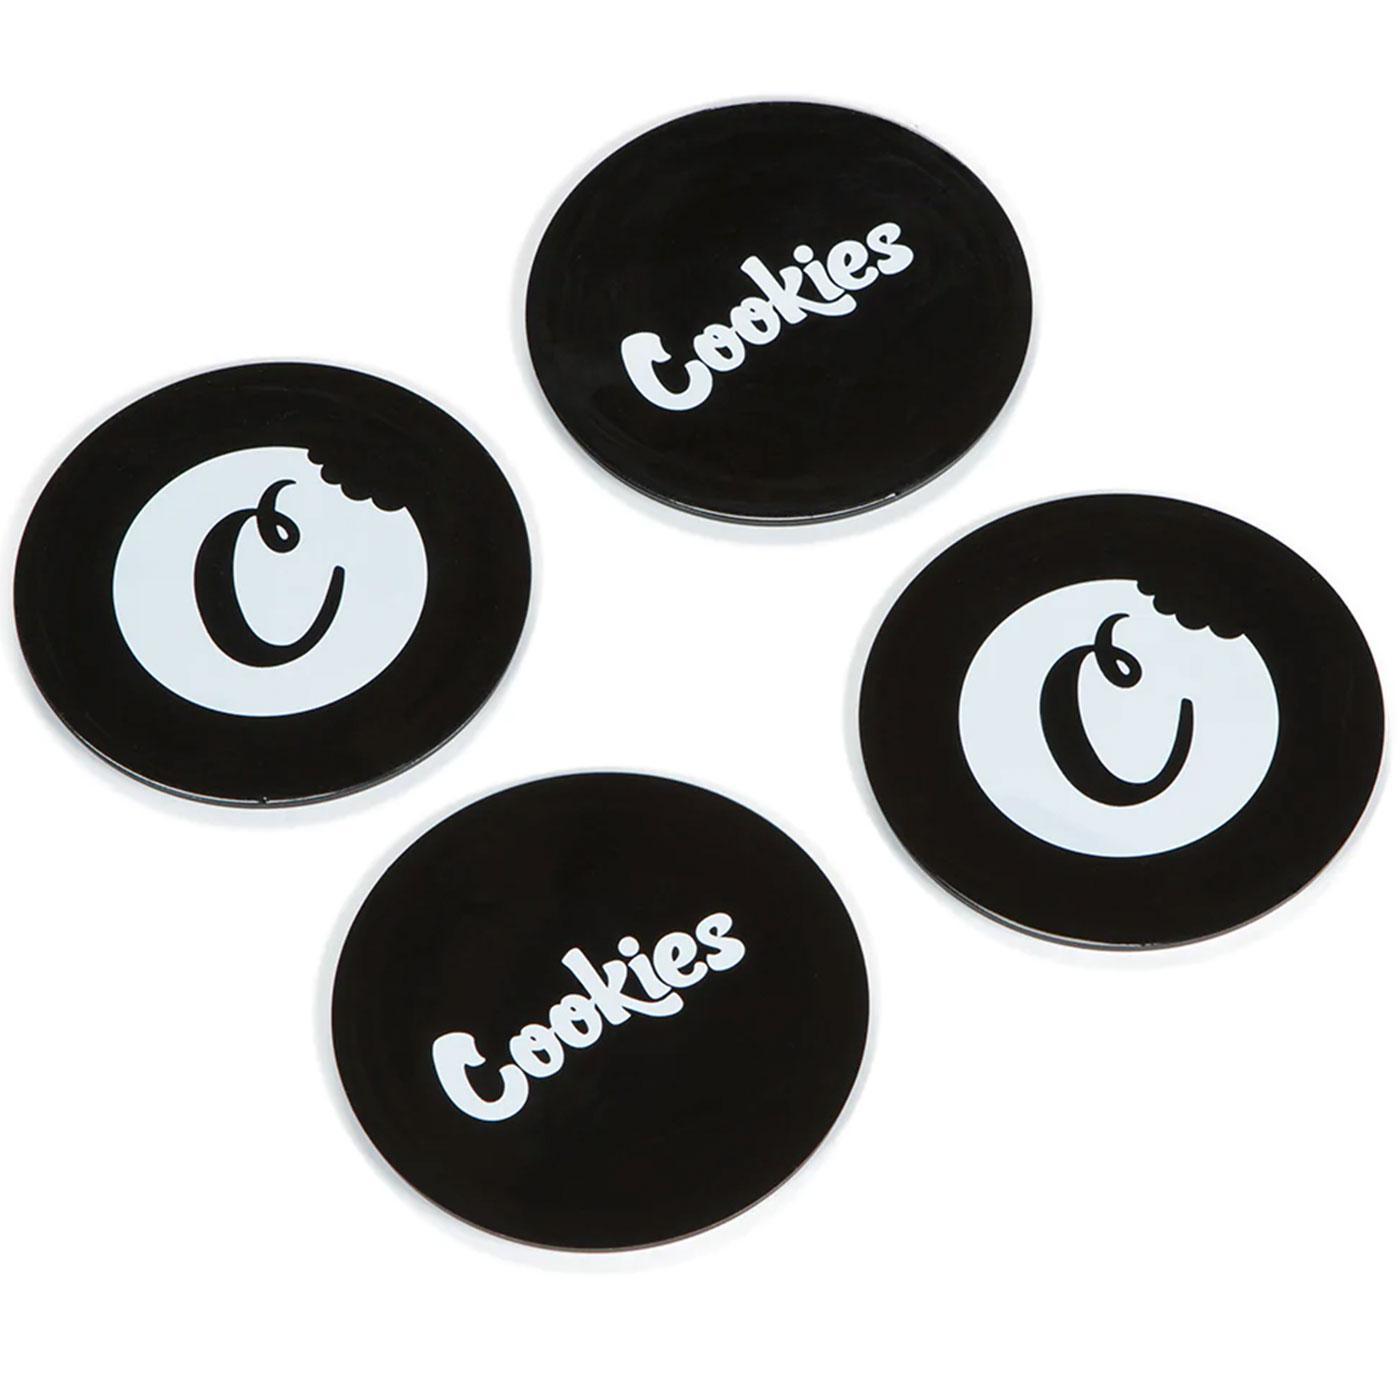 Cookies Silicone Table Coaster New (Cookies Blue)